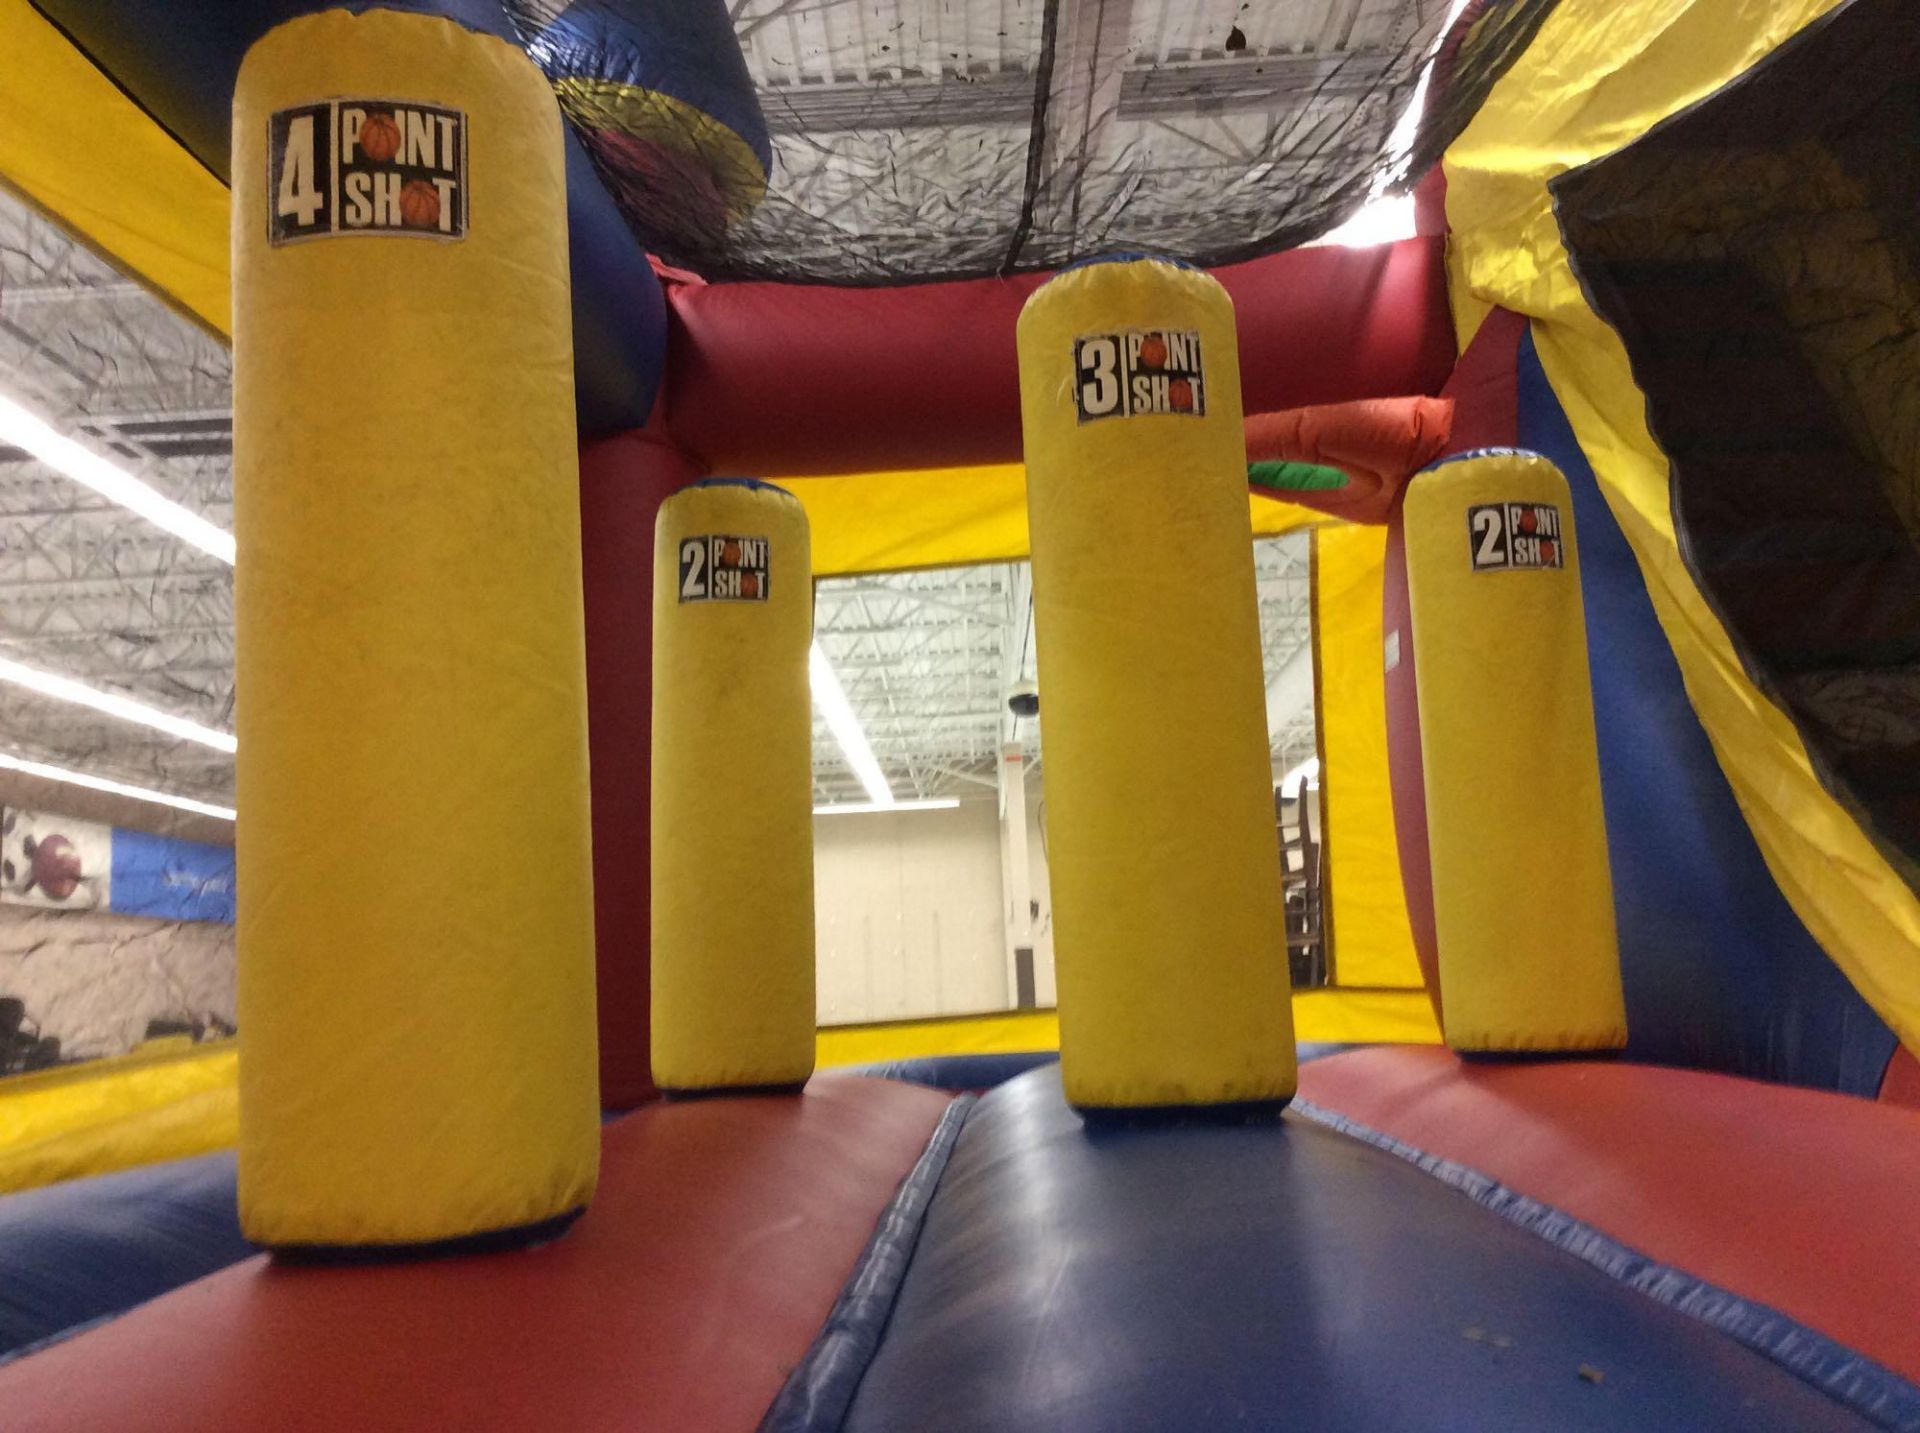 Inflatables.com brand 5-in-1 inflatable bounce with blower, approx. 15' x 20' overall - Image 2 of 4